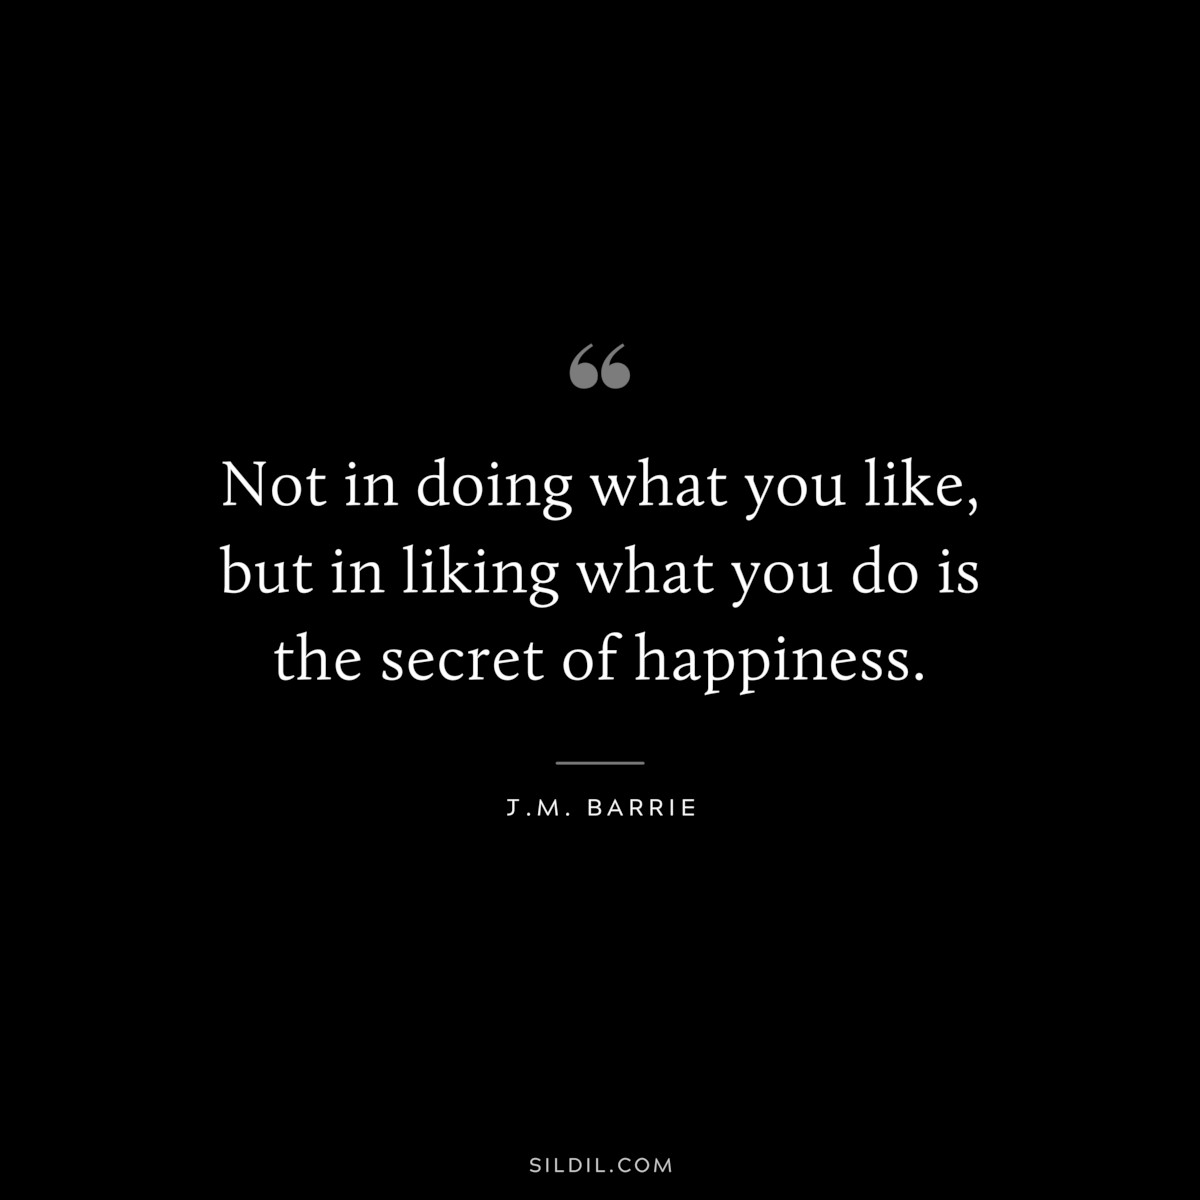 Not in doing what you like, but in liking what you do is the secret of happiness. ― J.M. Barrie